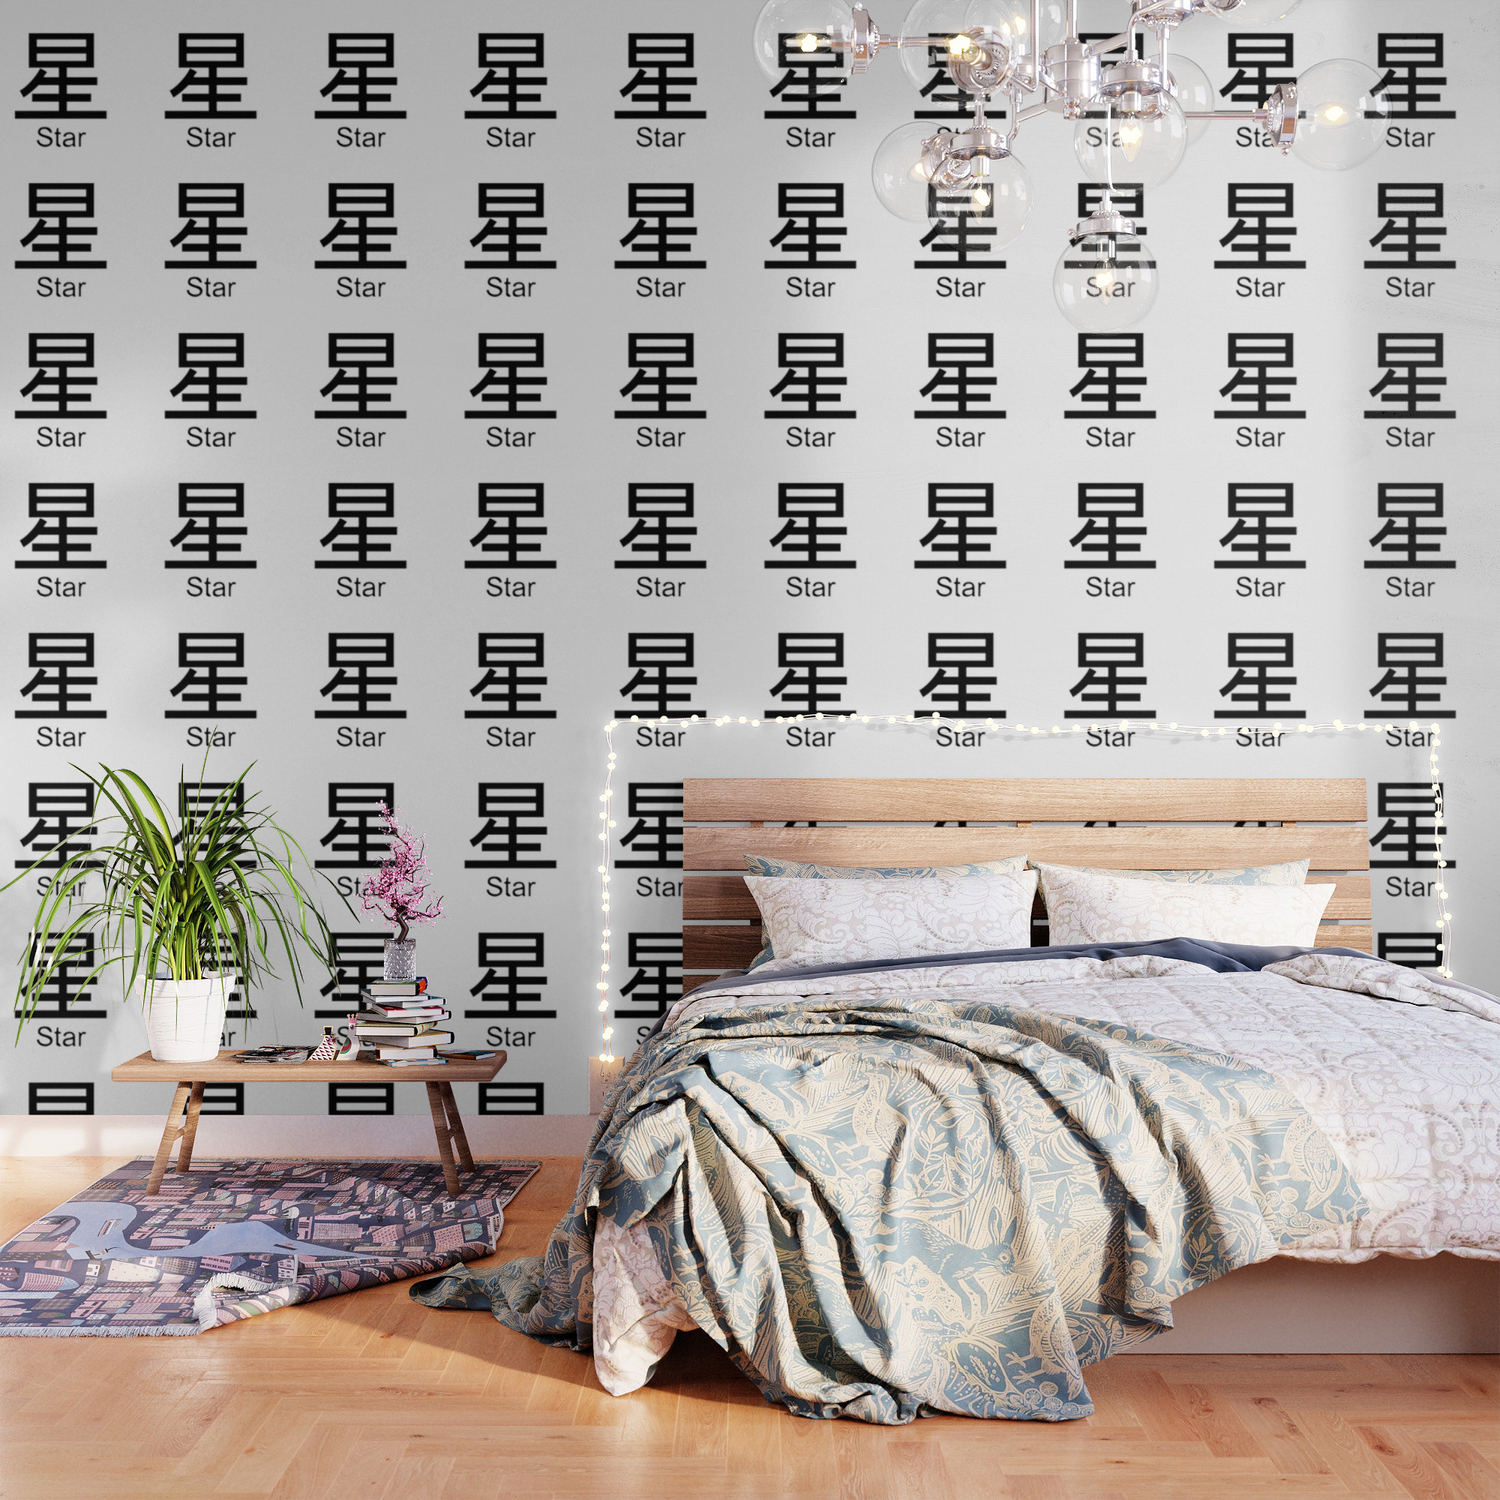 Star Japanese Writing Logo Icon Wallpaper by Aaron-H | Society6